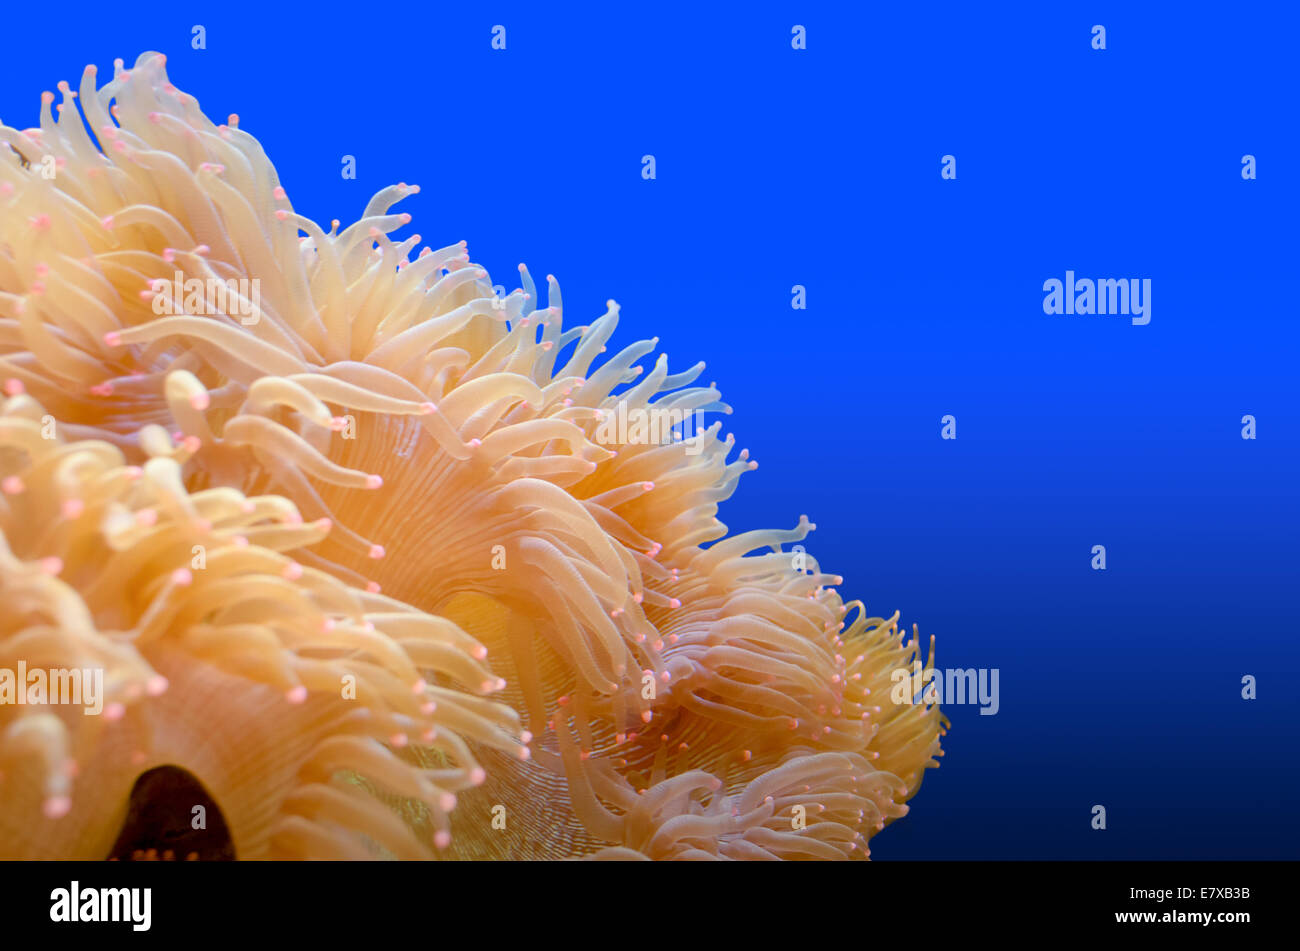 White anemones with pink tip on blue background, organism of the sea Stock Photo